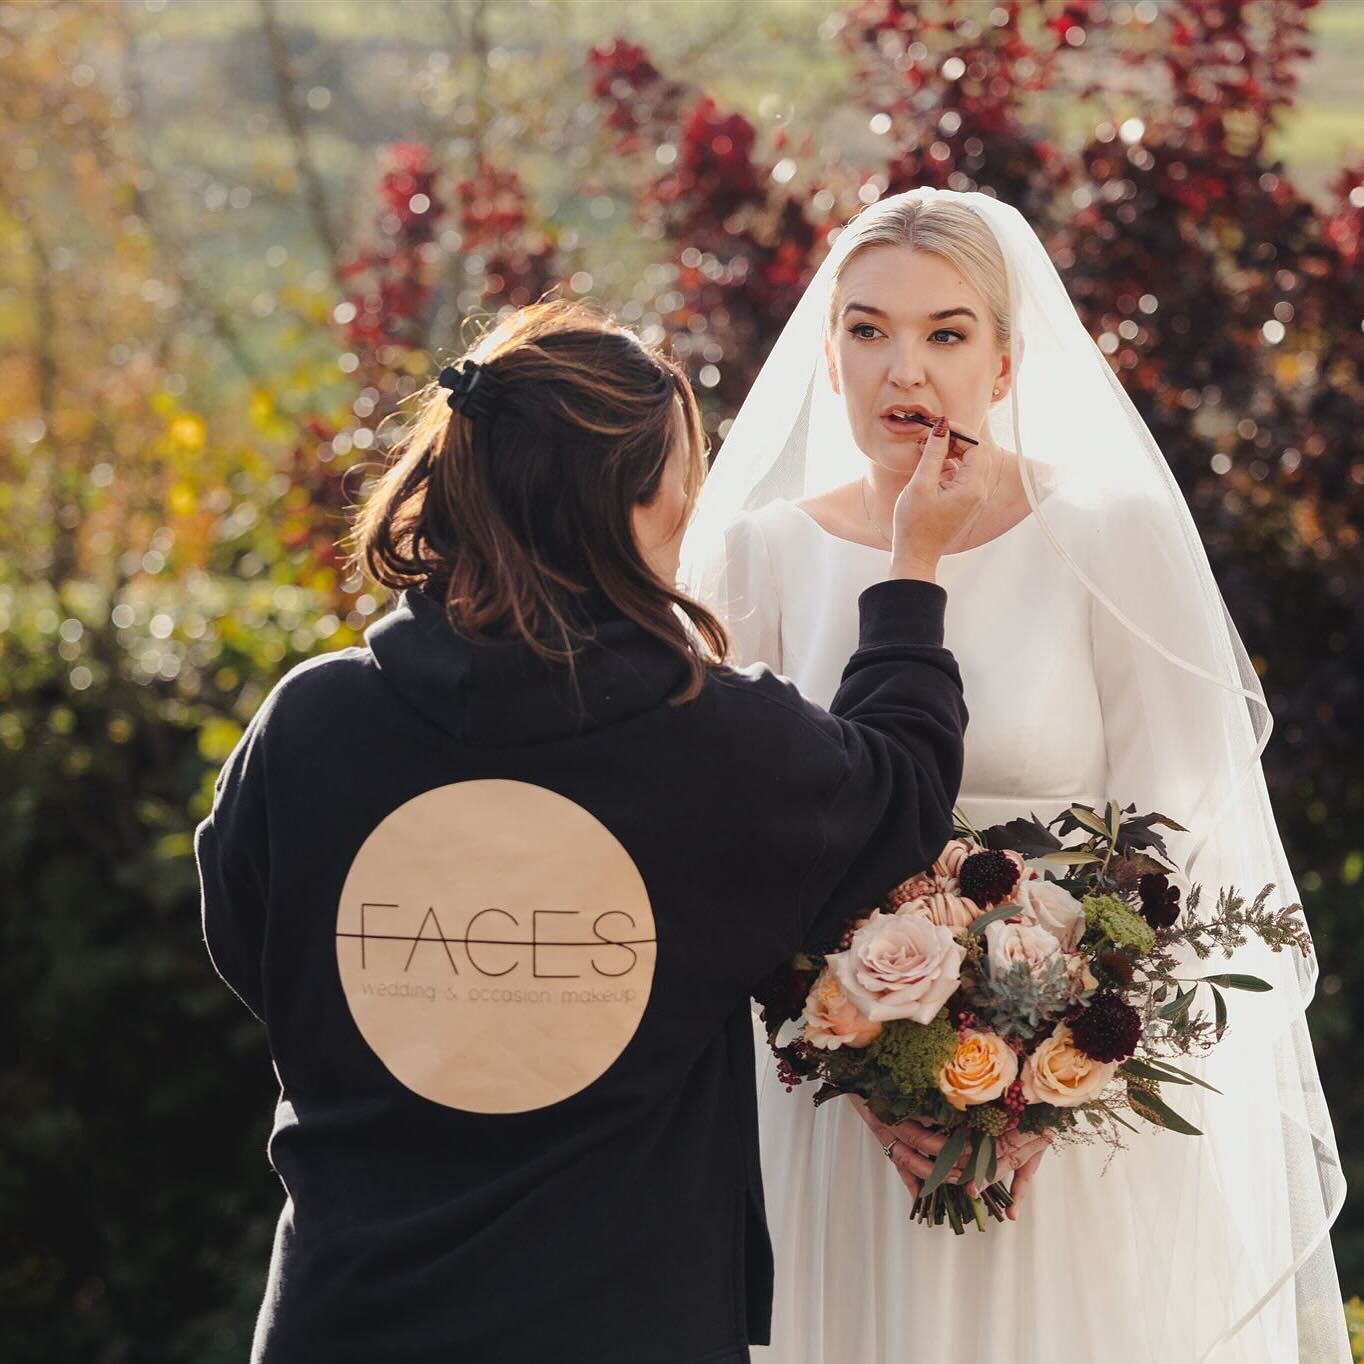 Always on hand for last minute touch ups ✨

We can guarantee we will be there until the very end for makeup touch ups and more - we like to be busy give us jobs to do!

That last hour before you leave for your ceremony can be a bit wild at times, we 